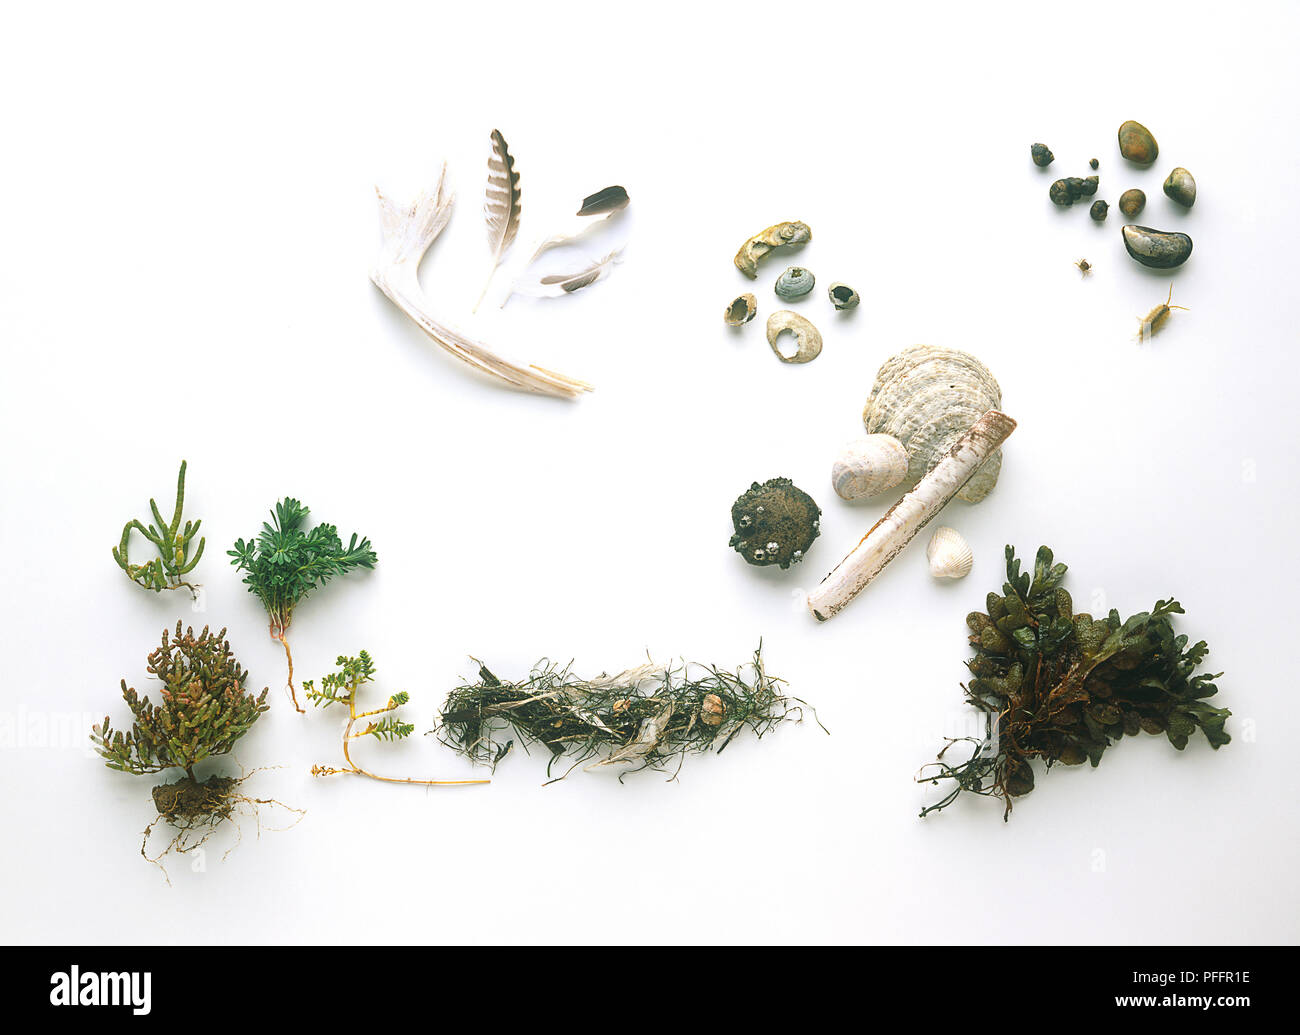 Collection of plants, shells, bones, pebbles and feathers found on the shores of a river's estuary, including Salicornia sp. (Glasswort), Euphorbia paralias (Sea spurge), Honckenya peploides (Sea sandwort), Zostera marina (Eel grass) and shore weed Stock Photo